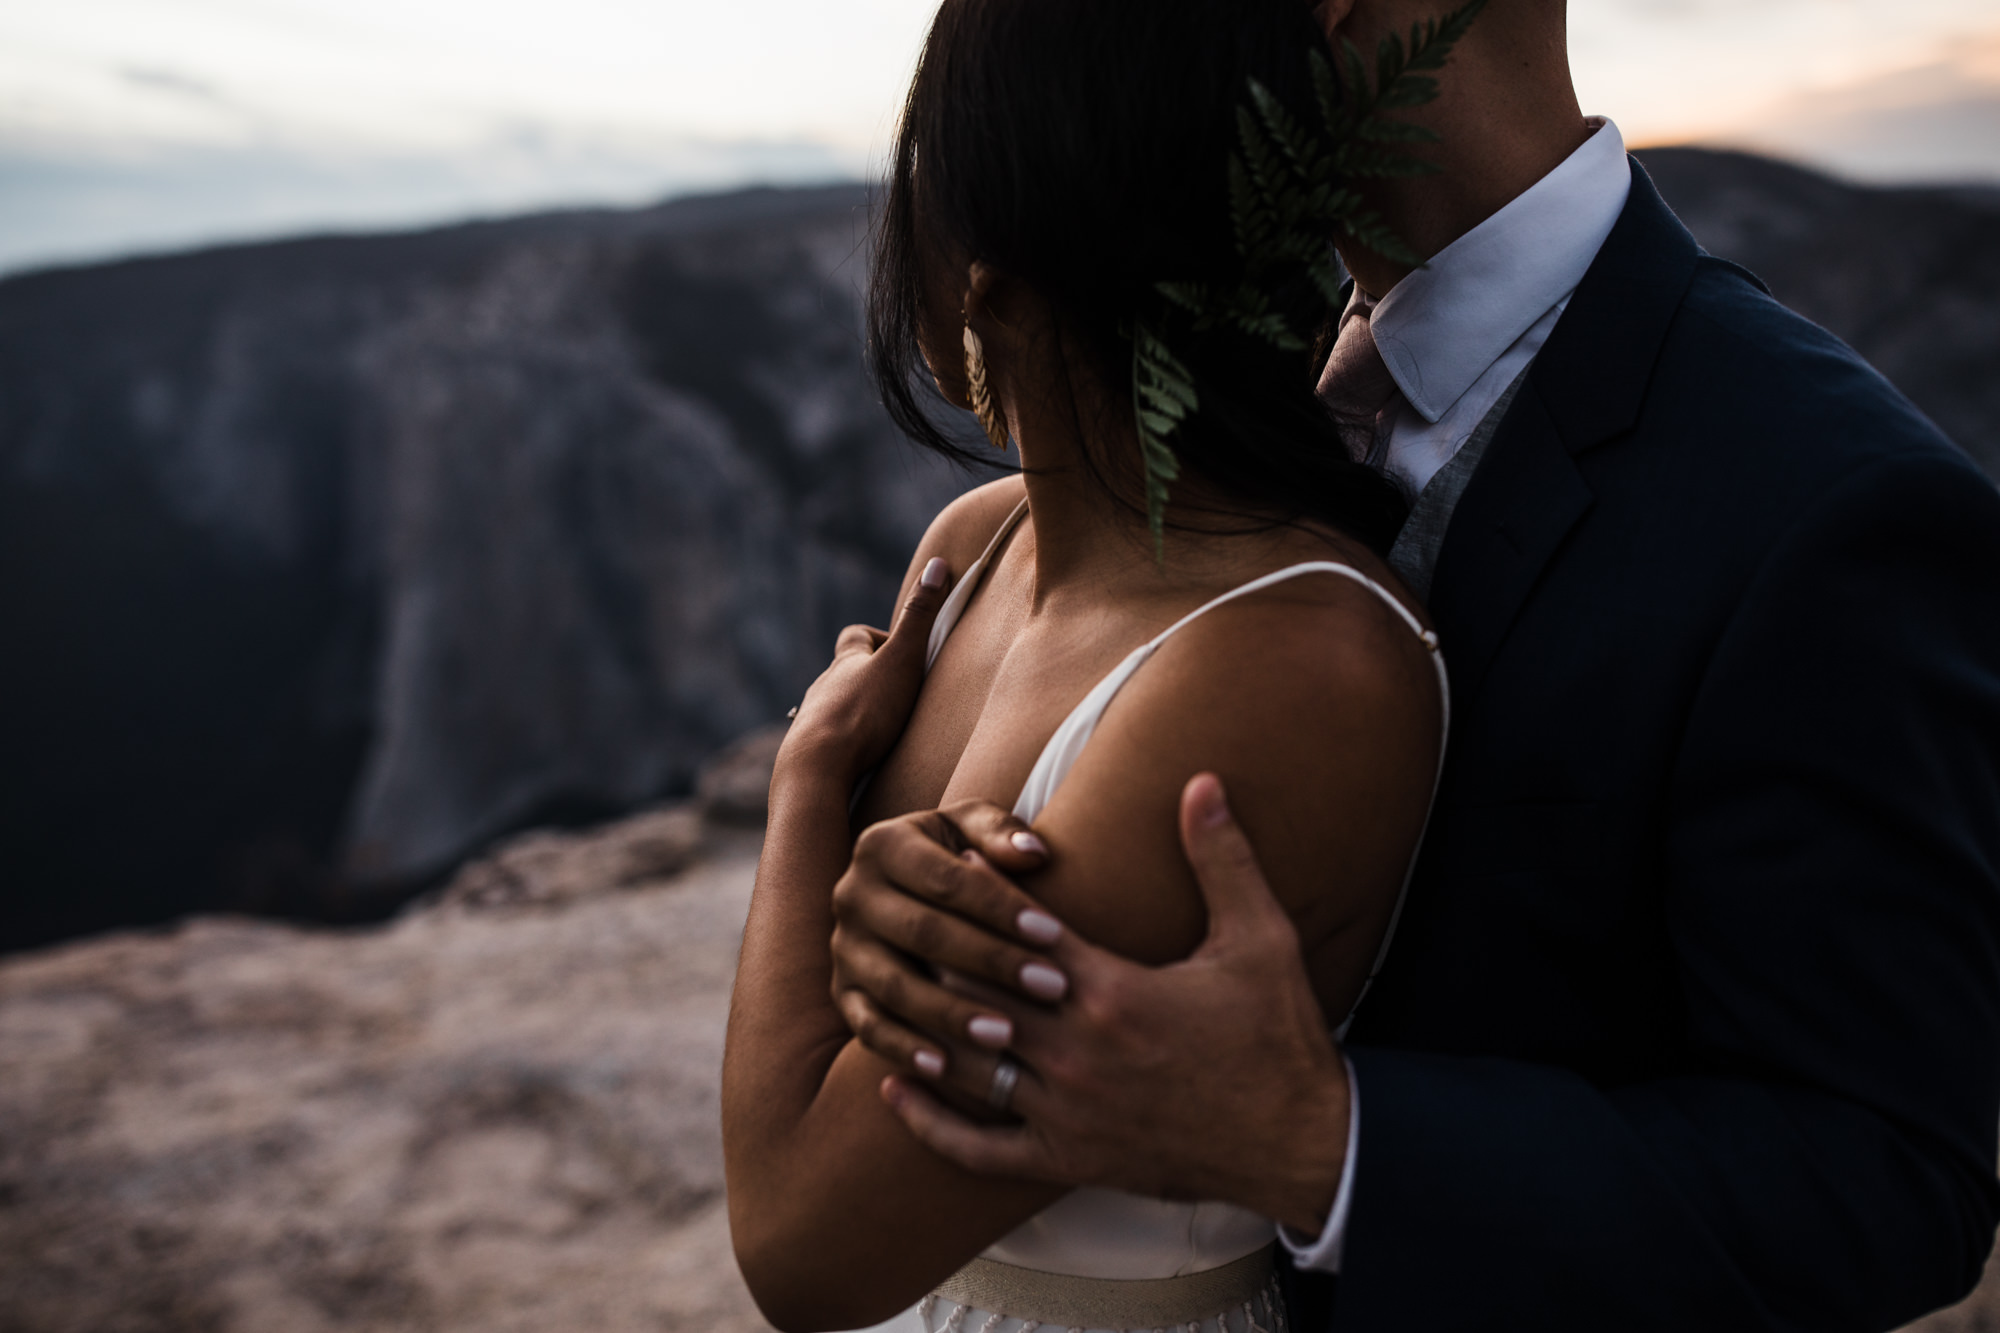 Intimate wedding in Yosemite national park | Glacier Point First look | Portraits at Taft Point | Traveling adventure elopement photographer